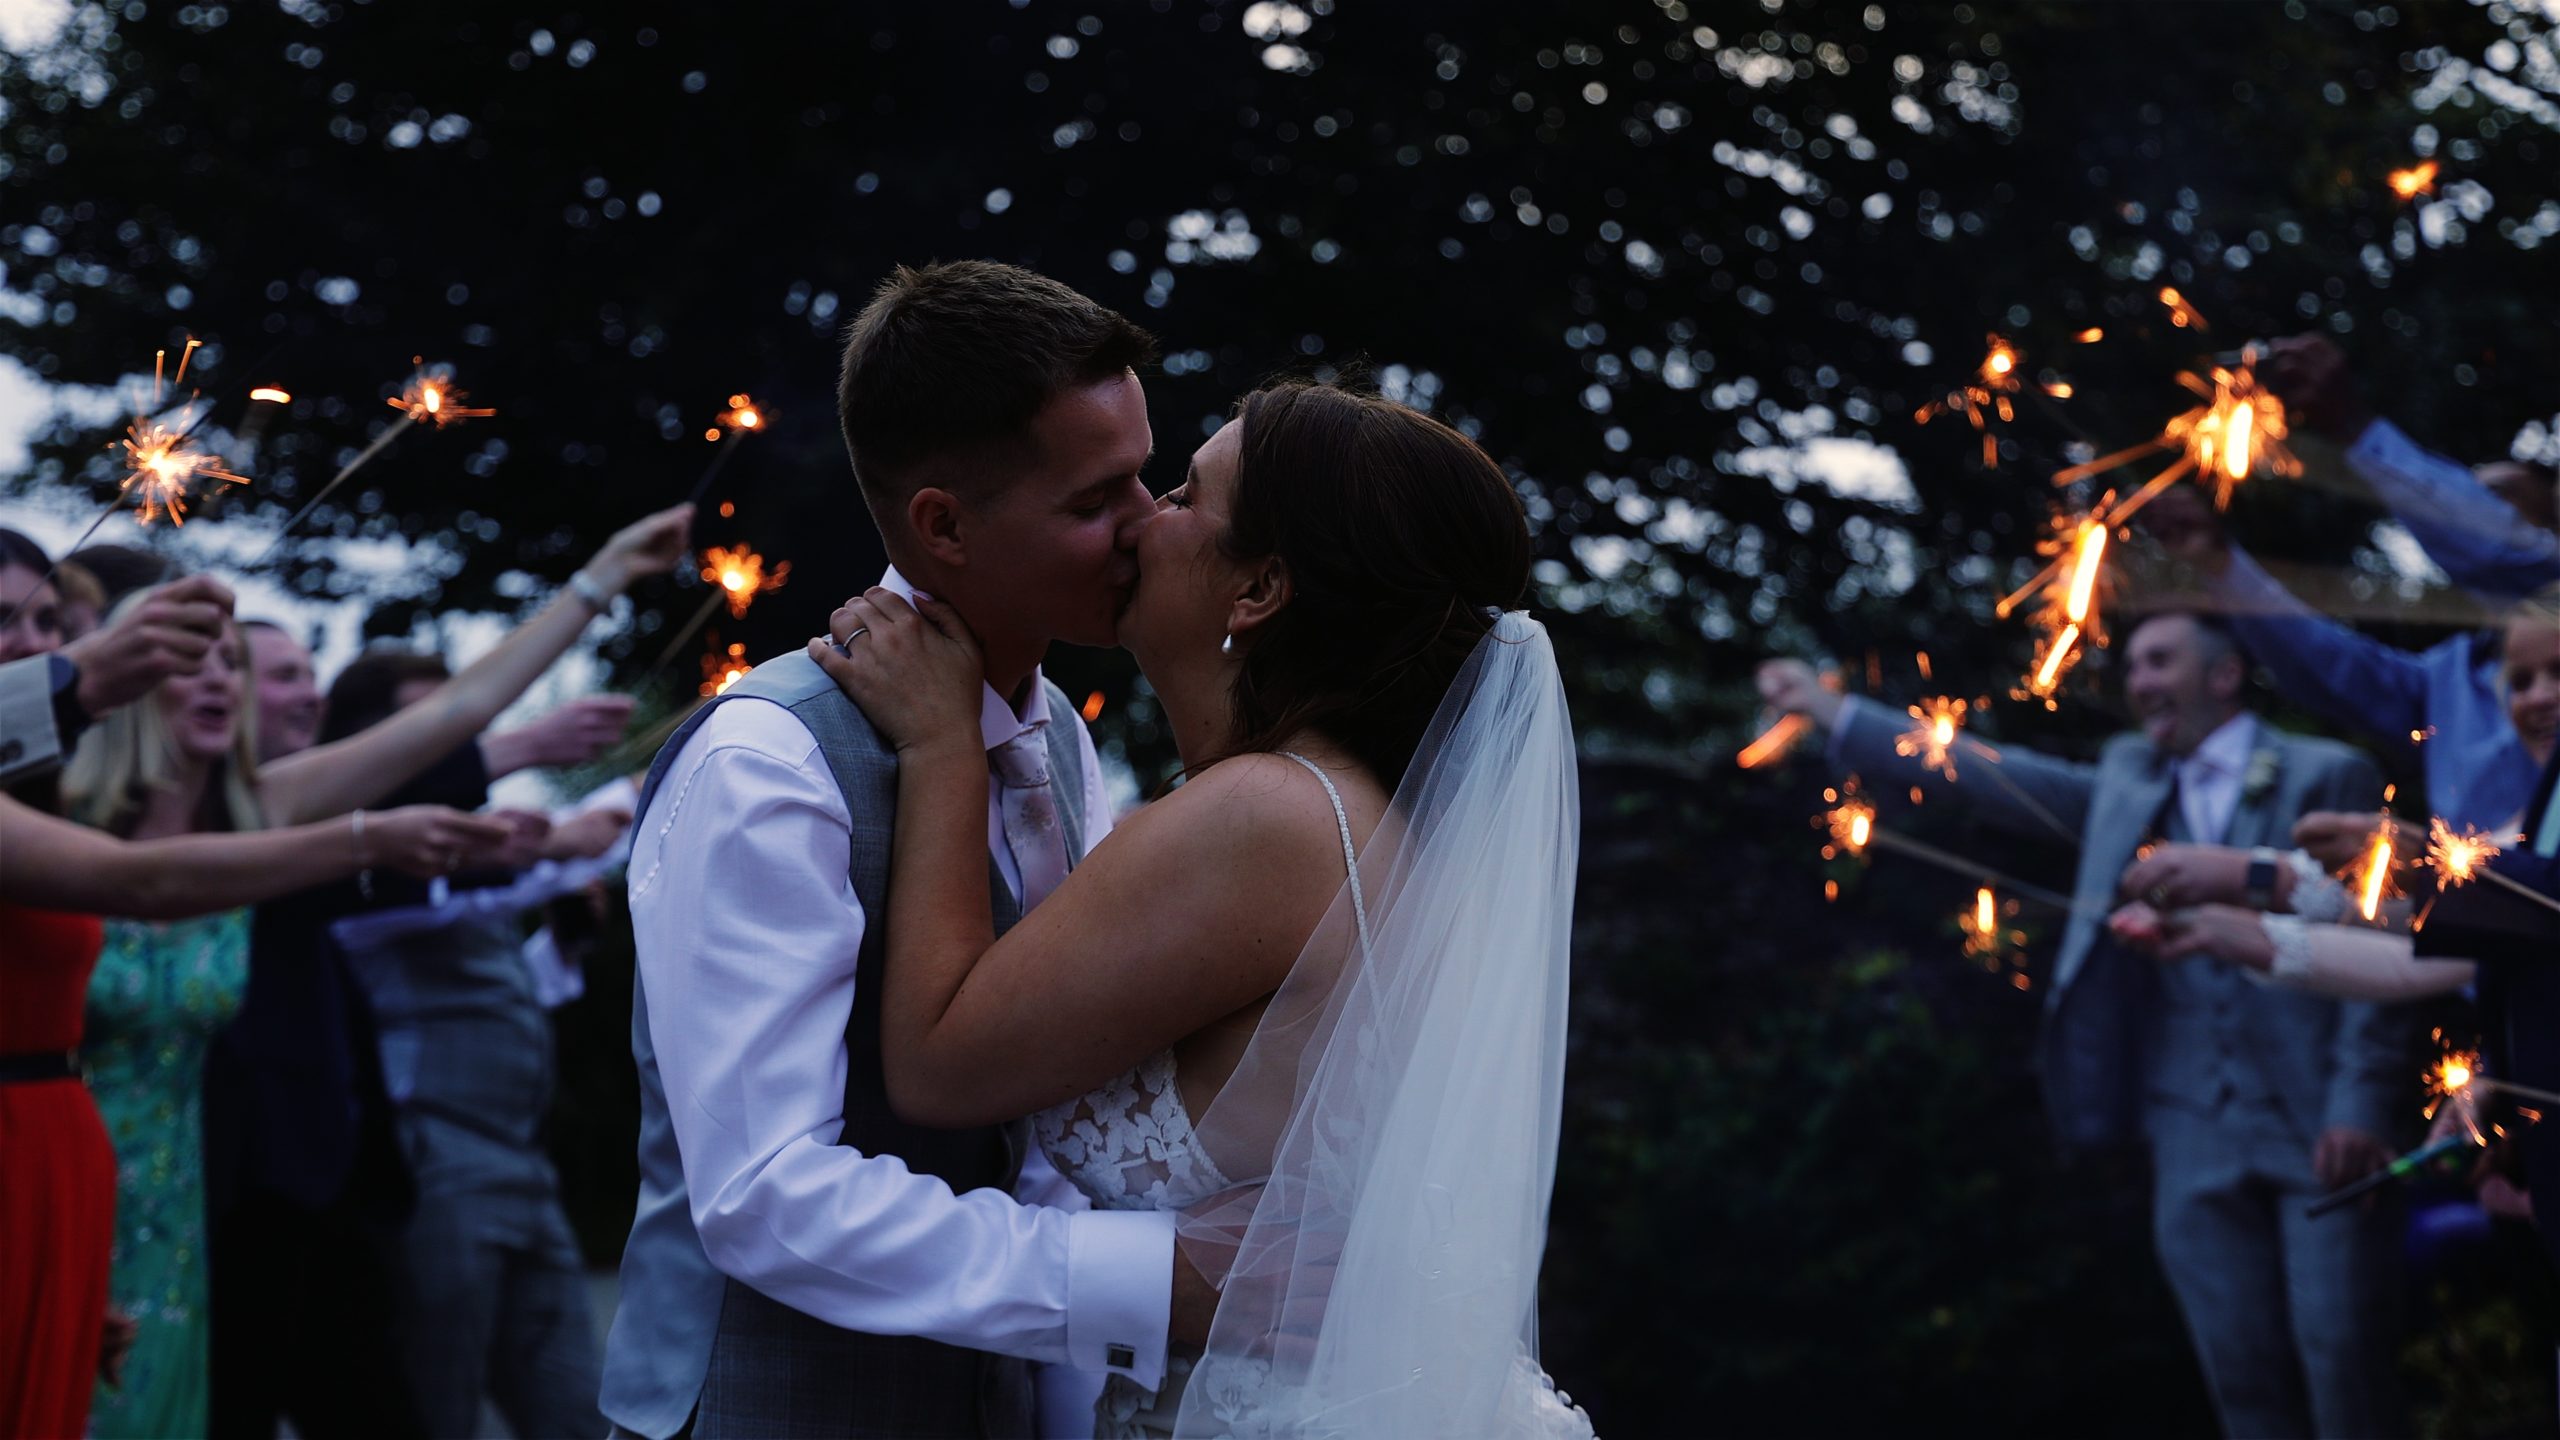 A bride and groom sharing a kiss during a tunnel of sparklers